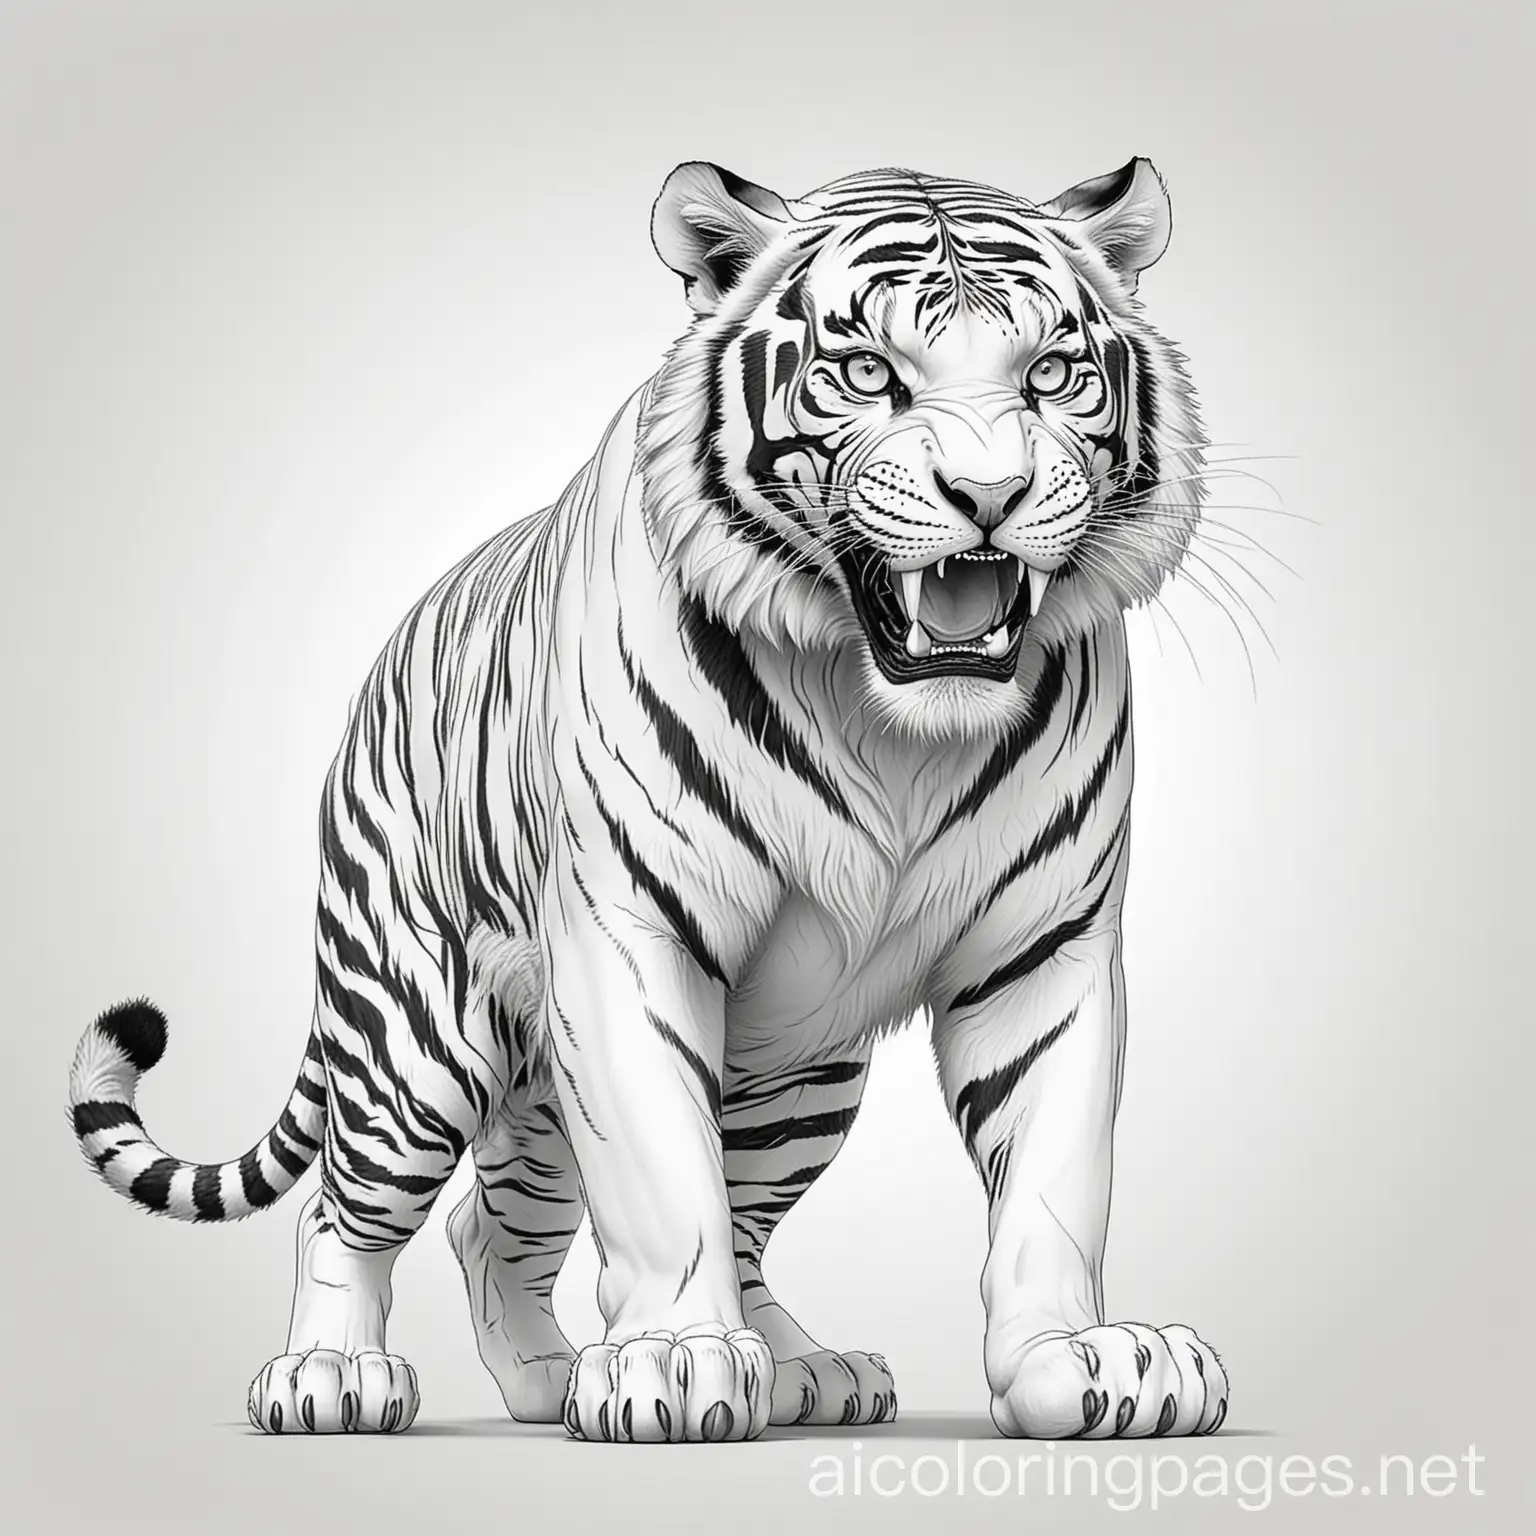 Fierce-Tiger-Ready-to-Attack-Cartoon-Style-Coloring-Page